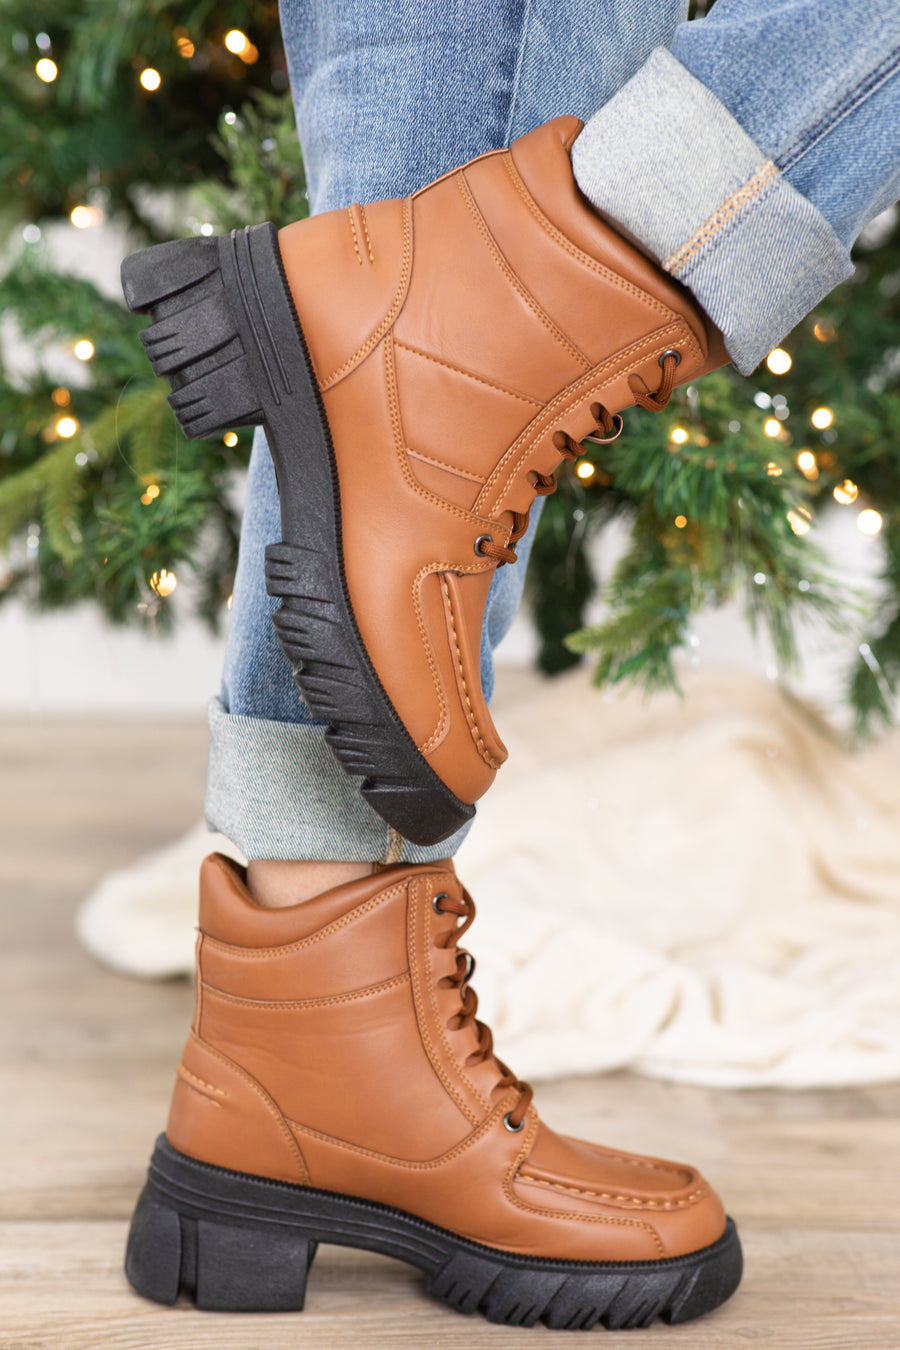 Brown Lace Up Boots With Black Lug Sole